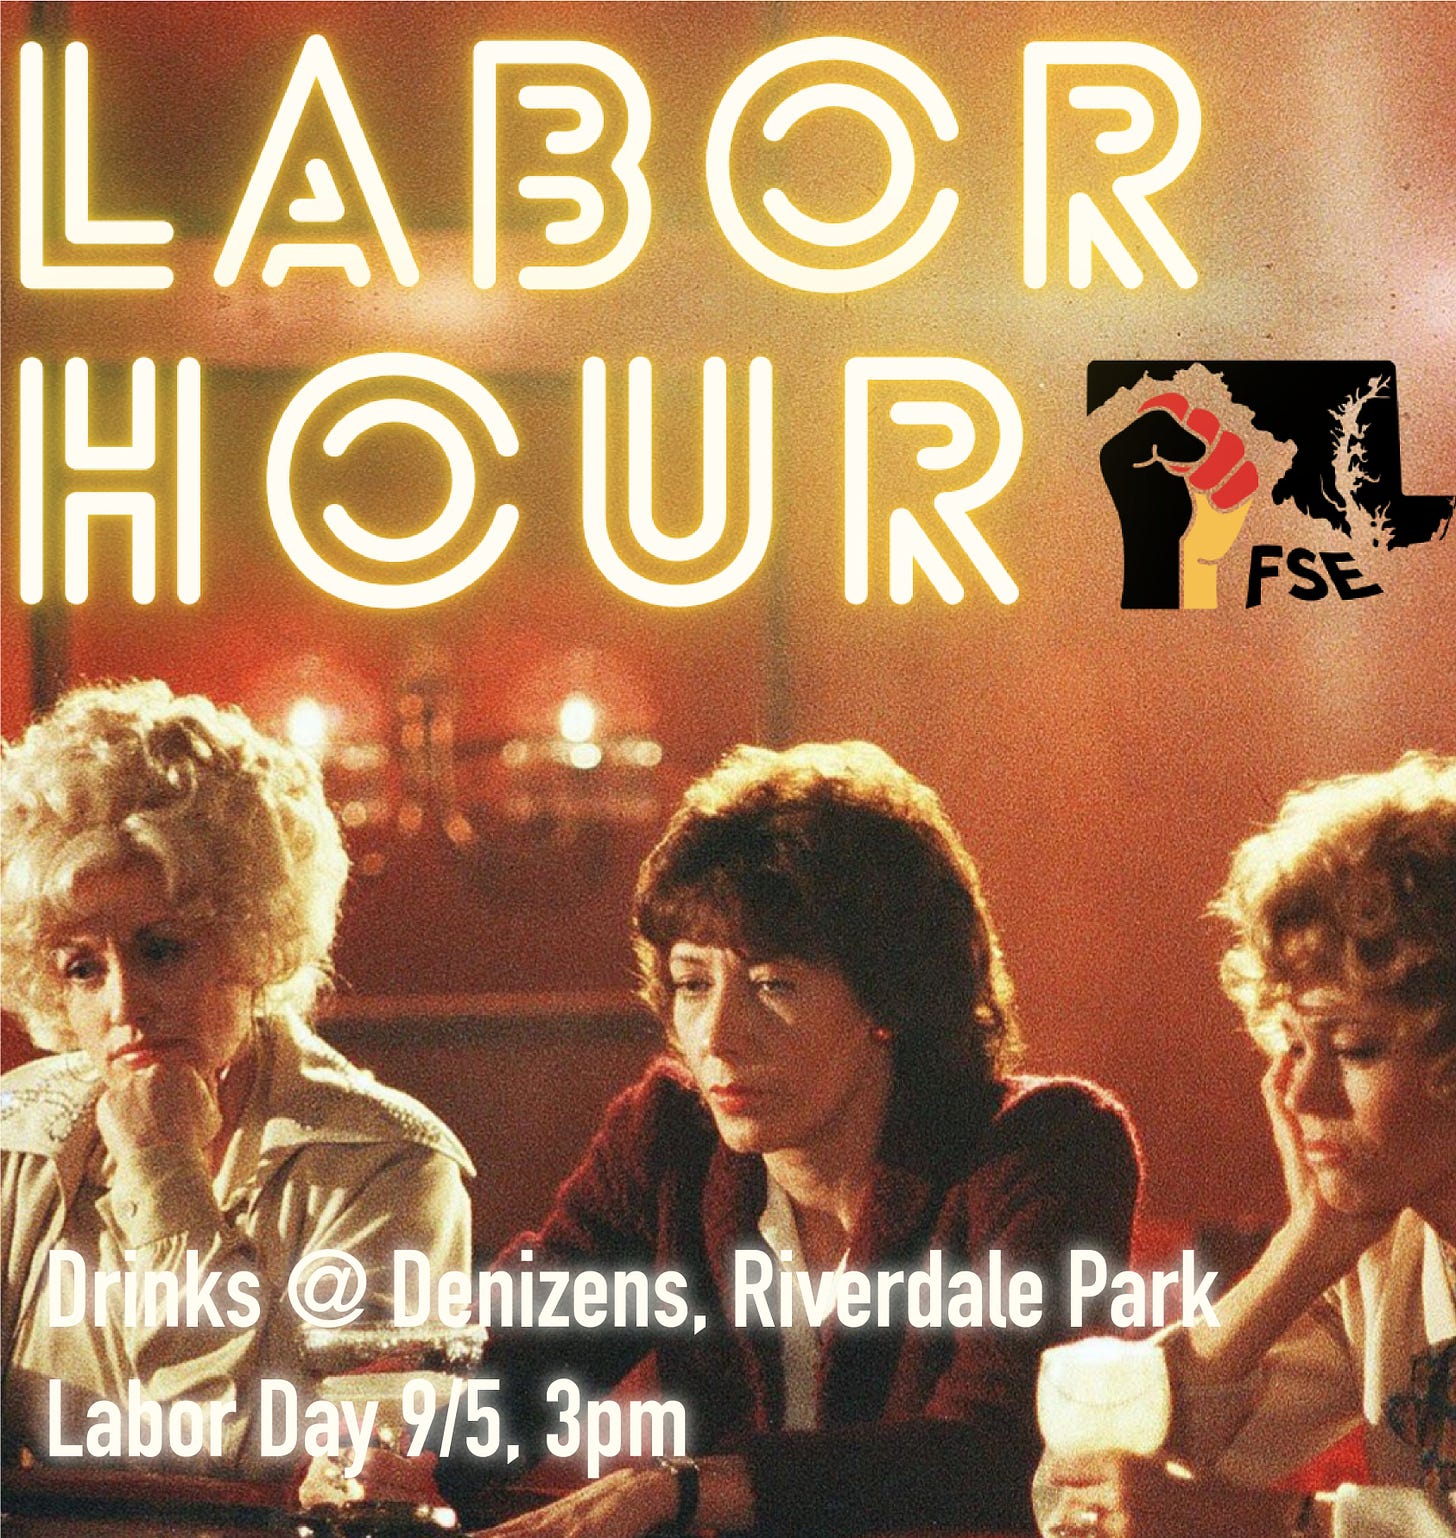 Image from 9-to-5 of workers sitting around a bar, looking tired. Text says: Labor Hour, FSE, Drinks @ Denizens, Riverdale Park, Labor Day, 9/5, 3pm